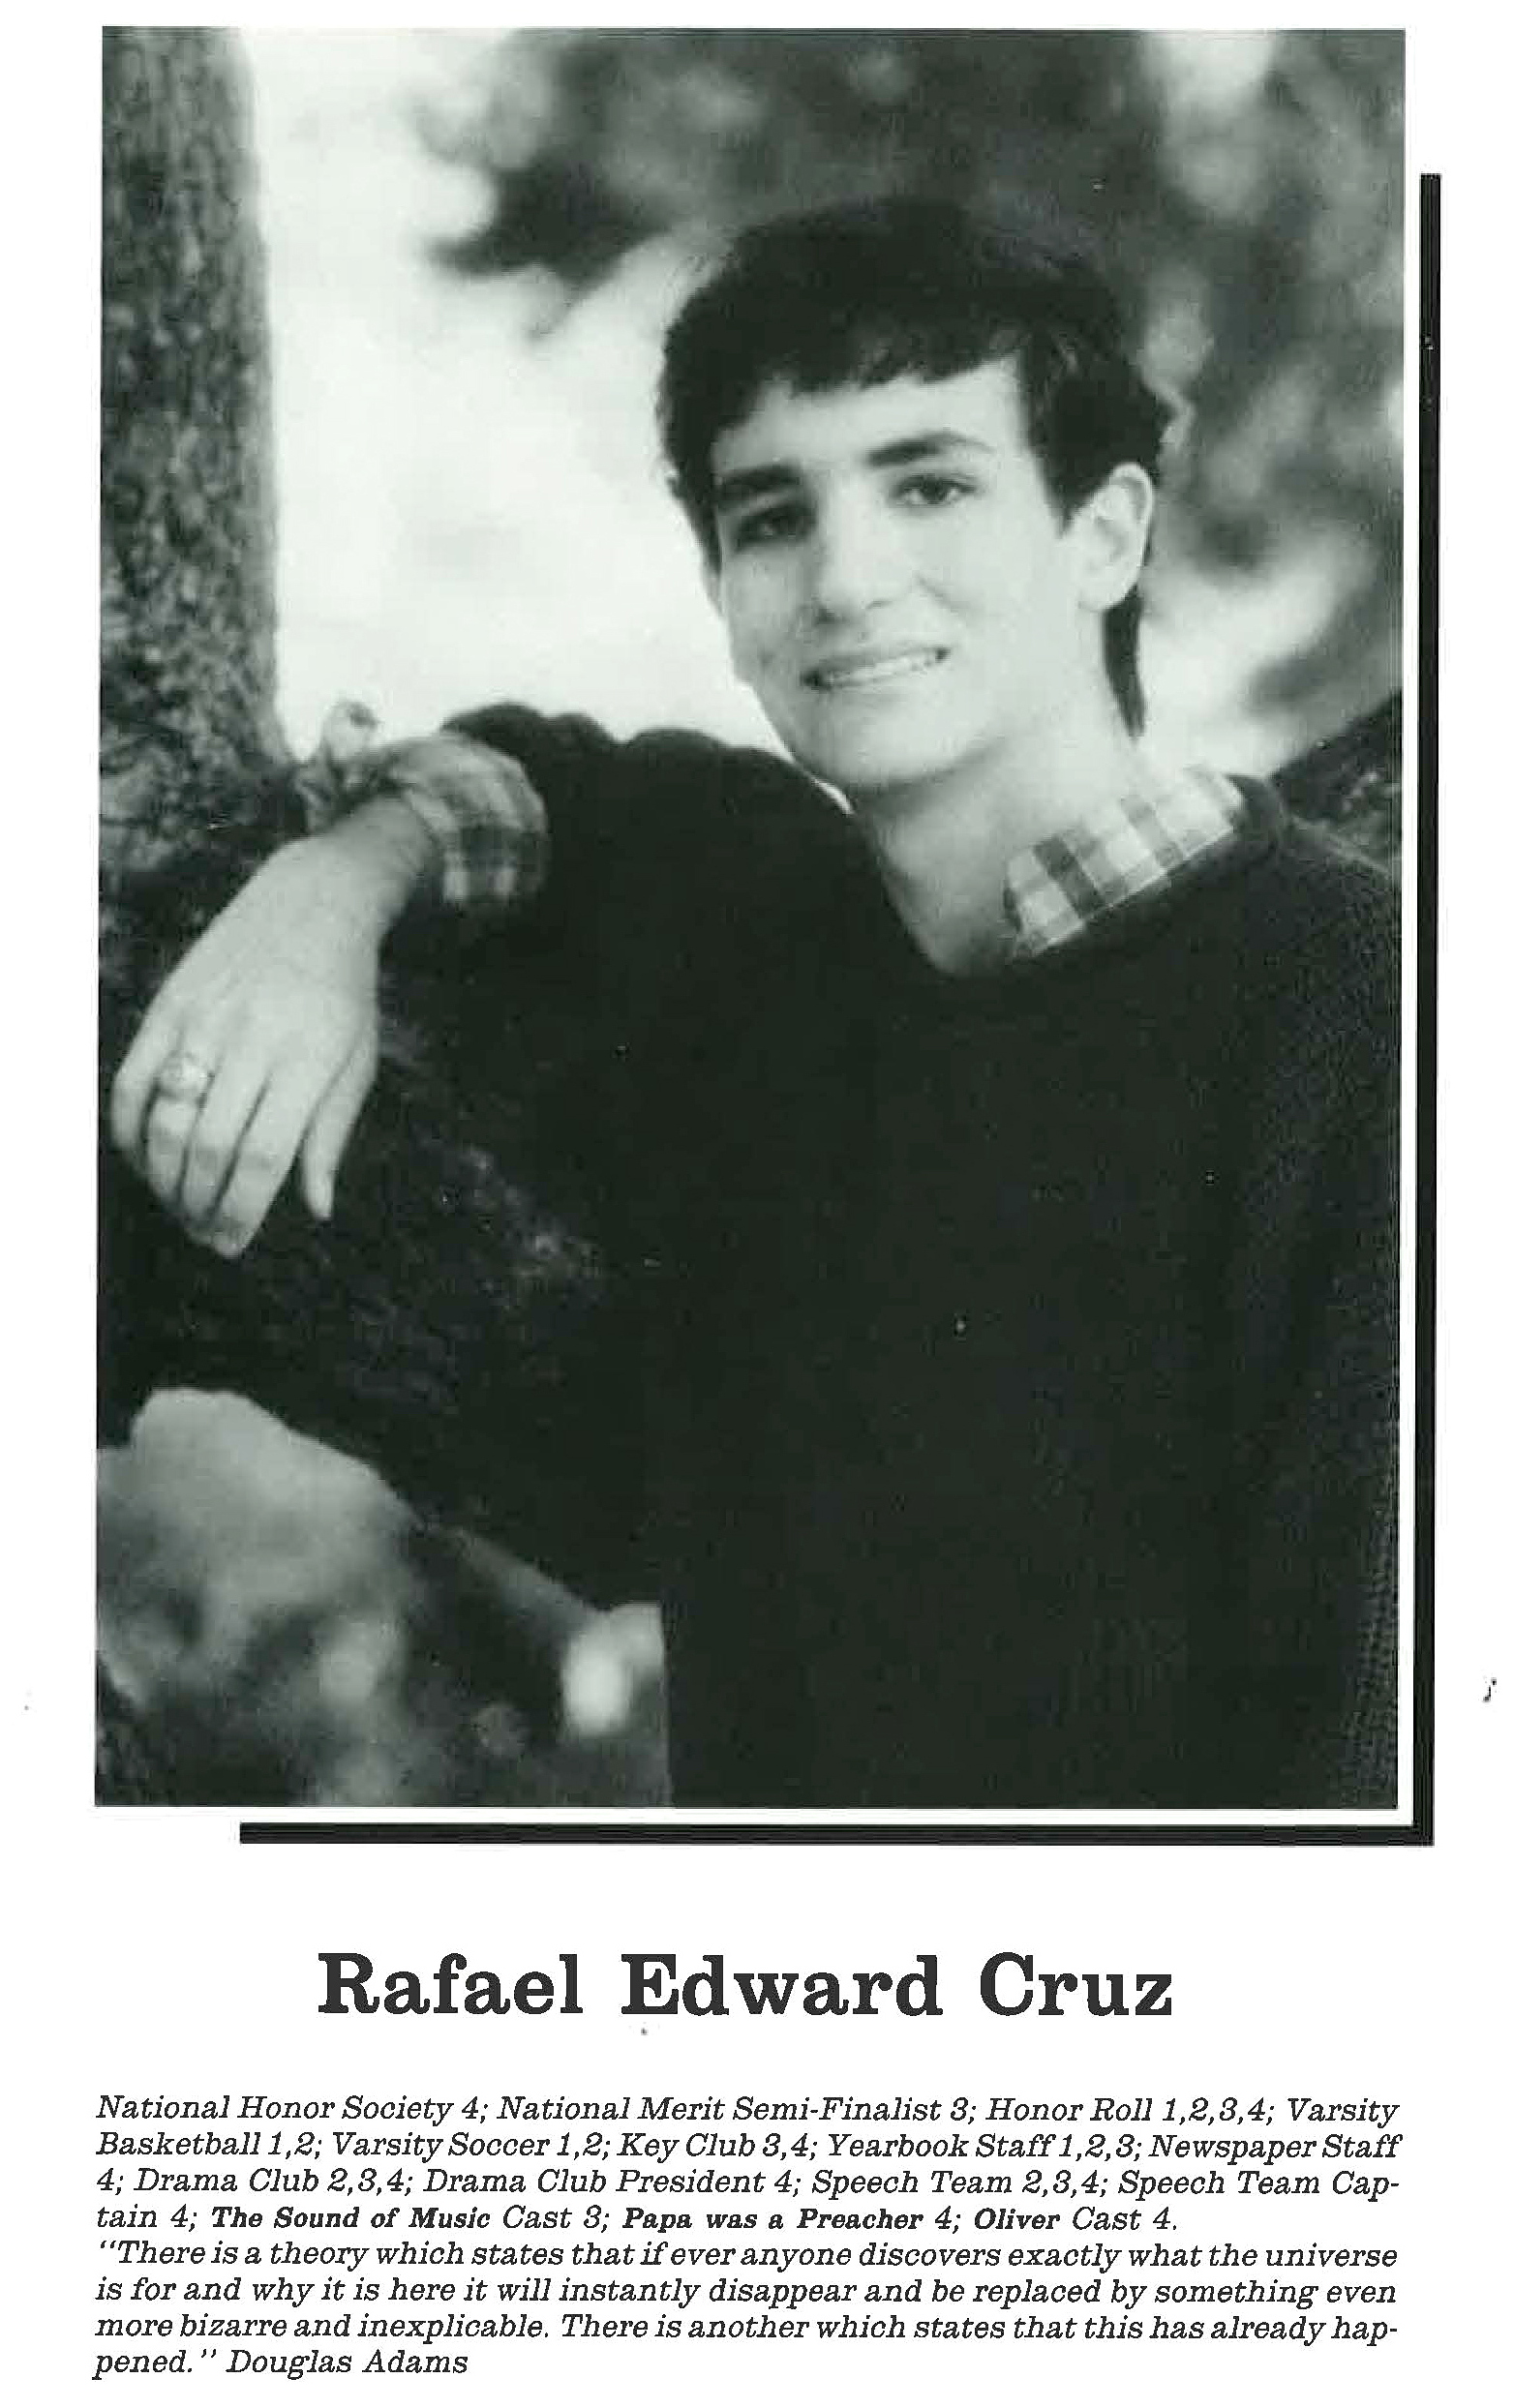 Cruz in his high school yearbook; he was president of the drama club.